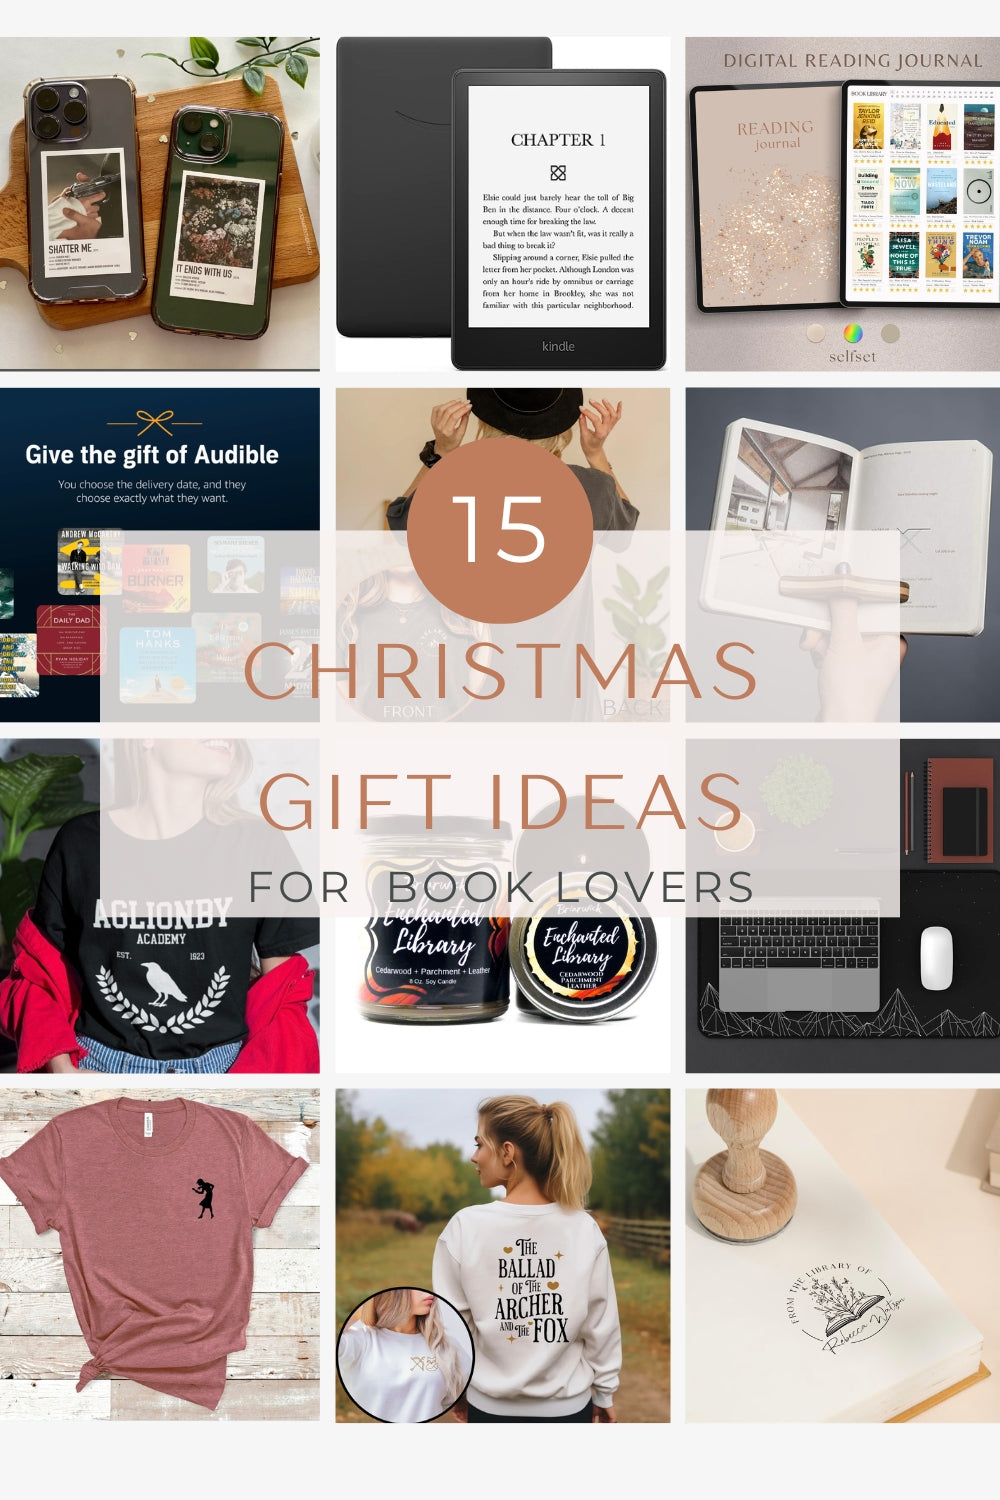 Christmas Gift Ideas for Book Lovers that aren't just books!